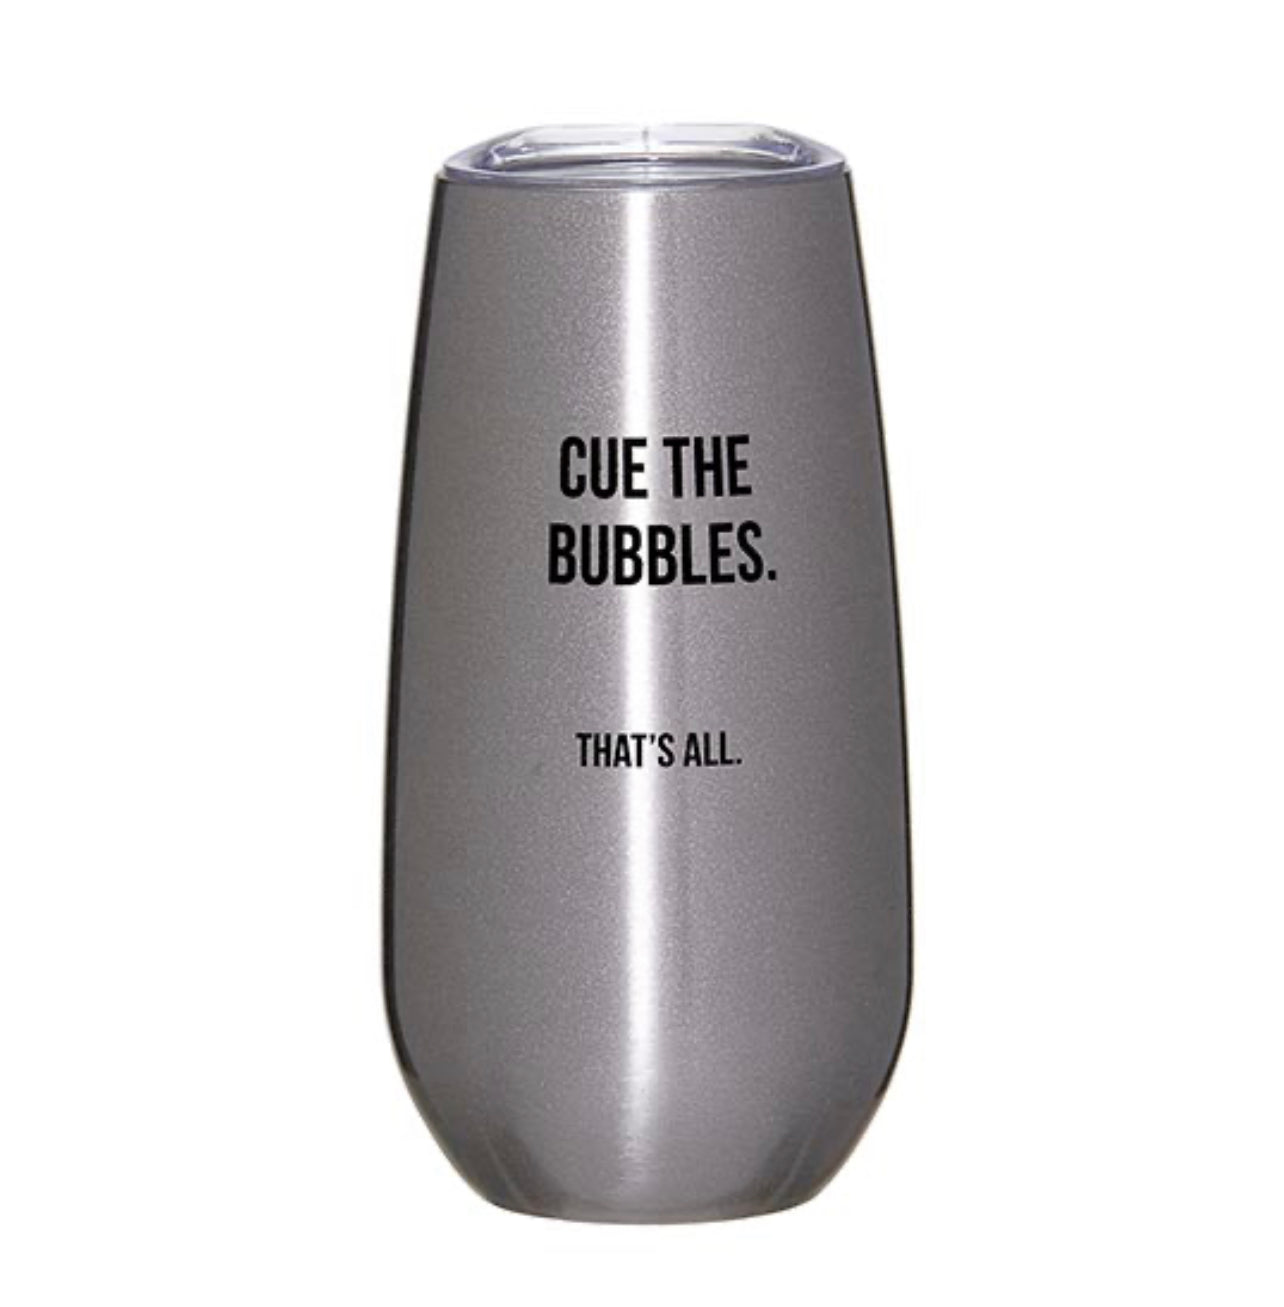 6 oz stainless steel champagne tumbler in a silver color with a plastic lid with words in black saying "Cue the bubbles. That's all."